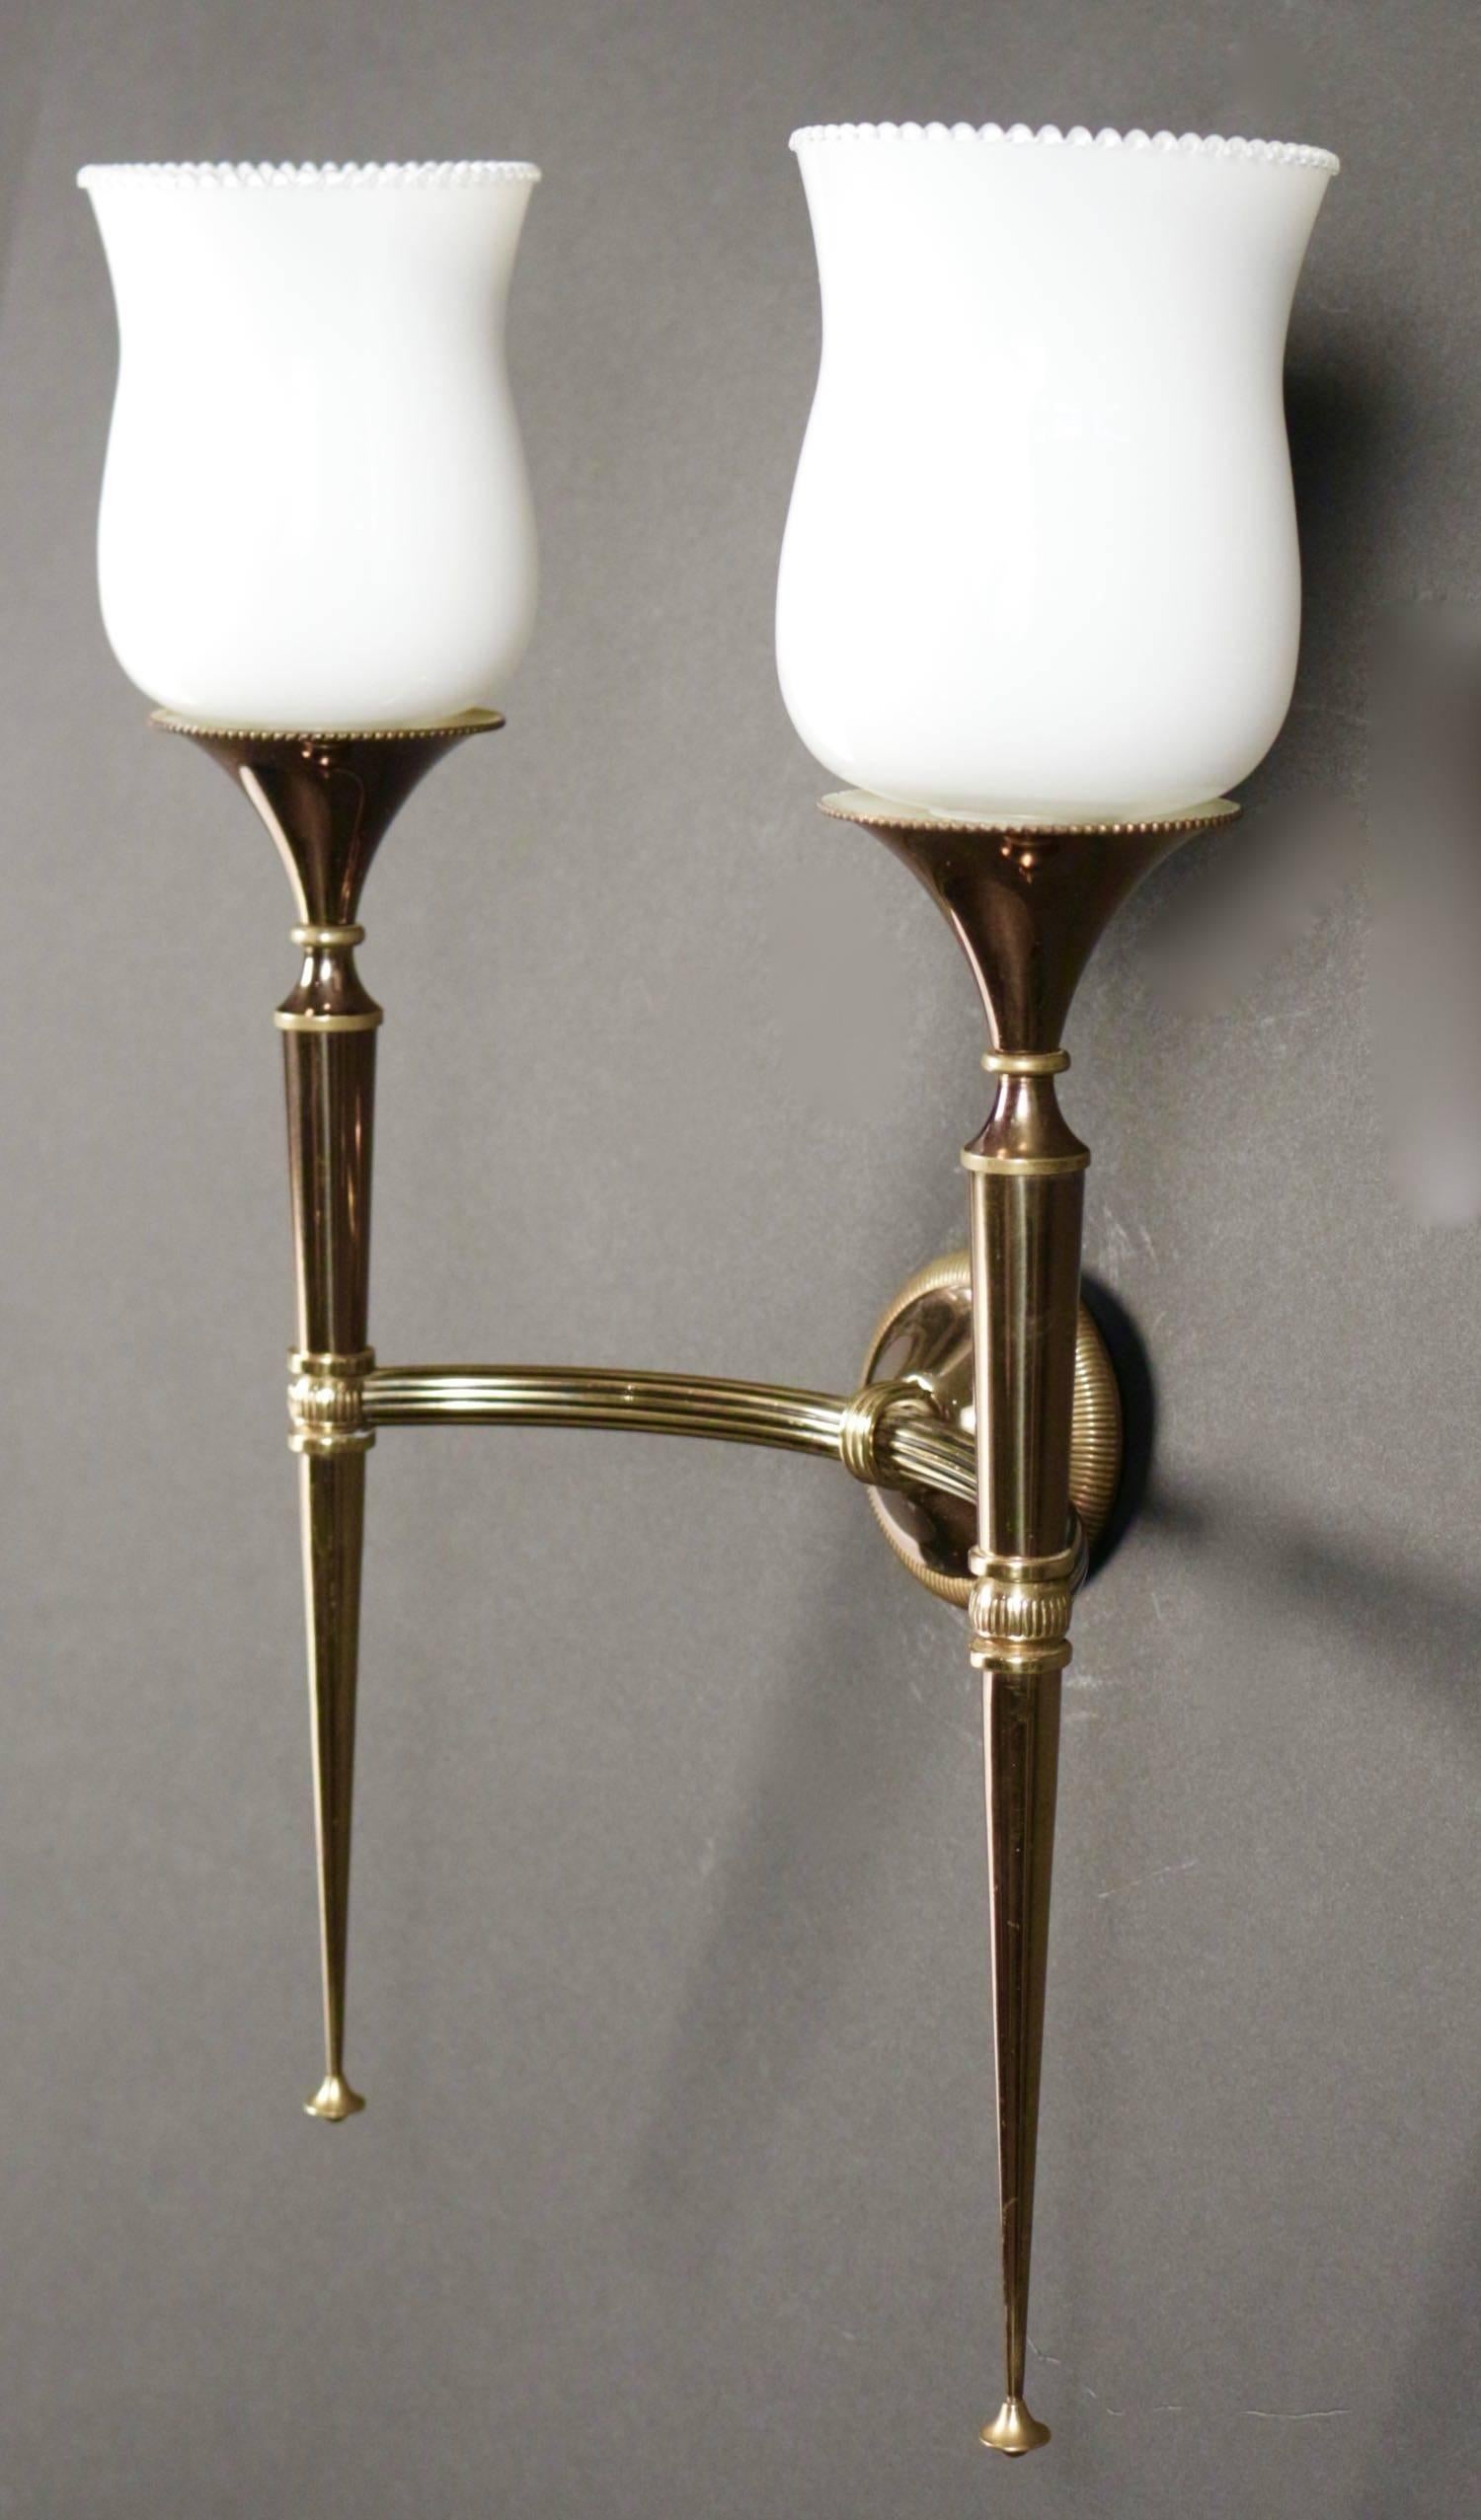 Mid-20th Century 1950s Pair of Sconces by Maison Arlus